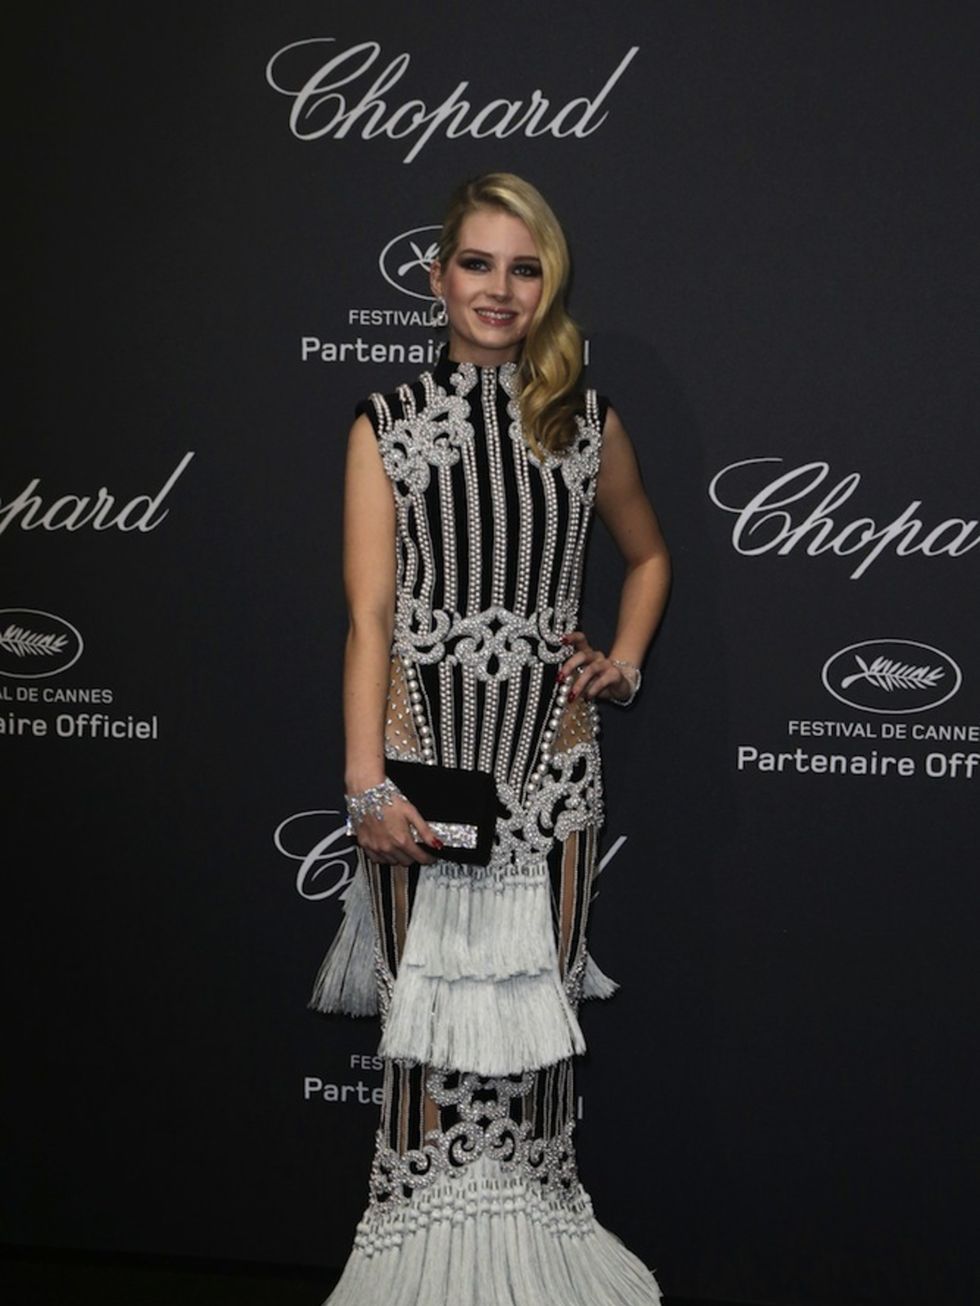 Lottie Moss attends Chopard Wild Party as part of The 69th Annual Cannes Film Festival